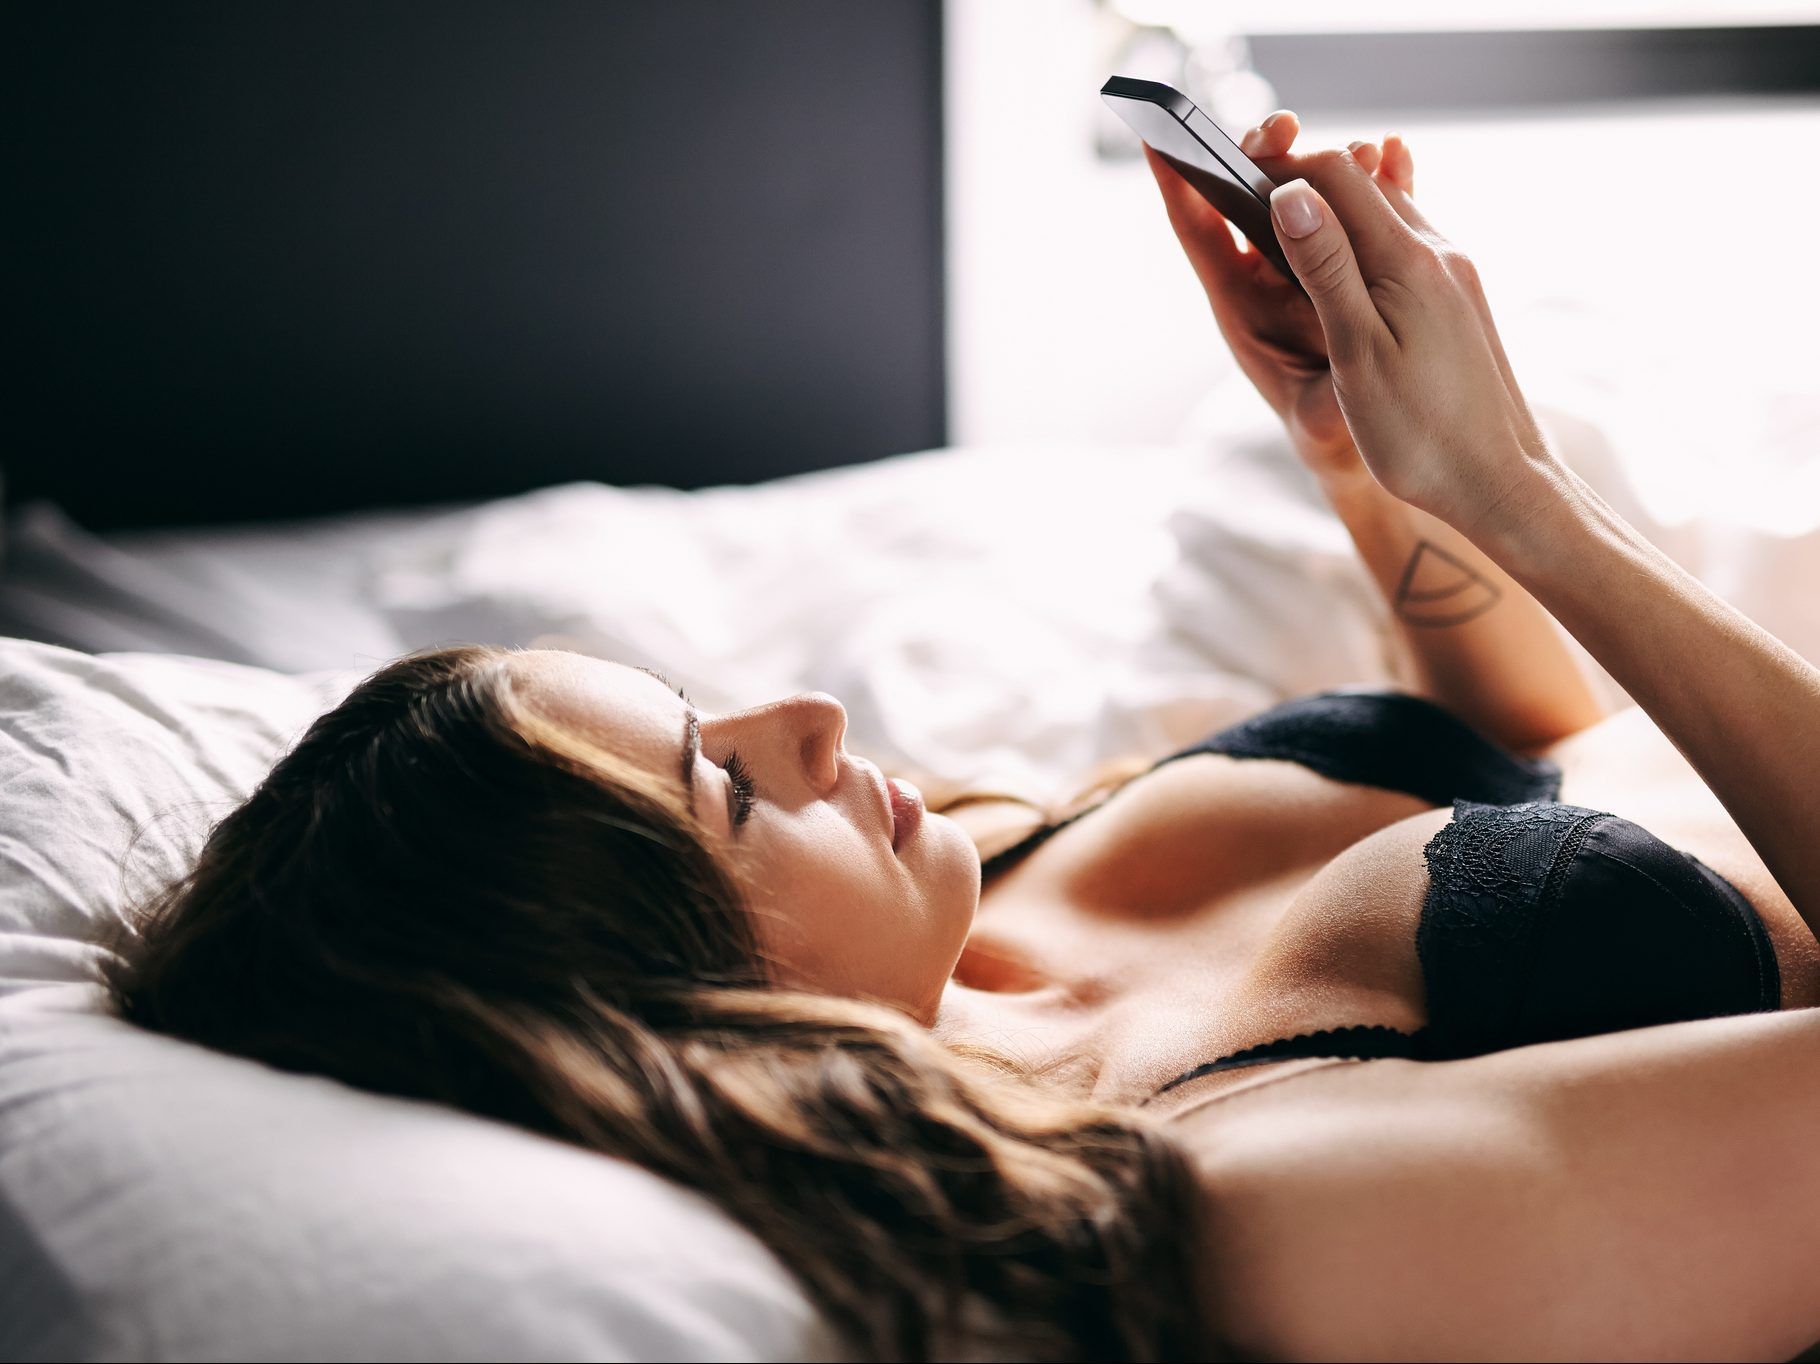 Women feel obligated to send sexy nude pics Study Toronto image